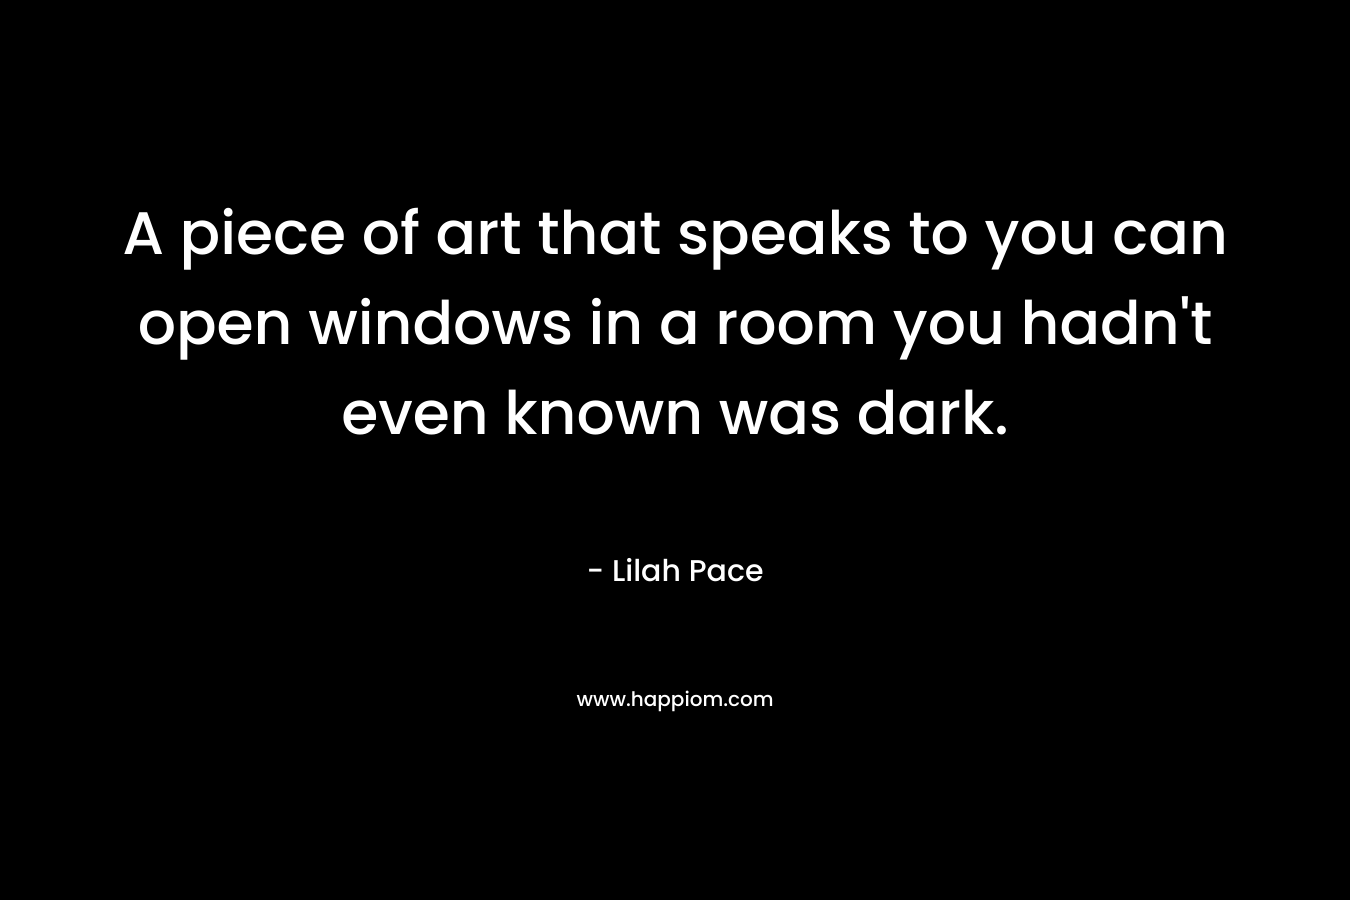 A piece of art that speaks to you can open windows in a room you hadn't even known was dark.